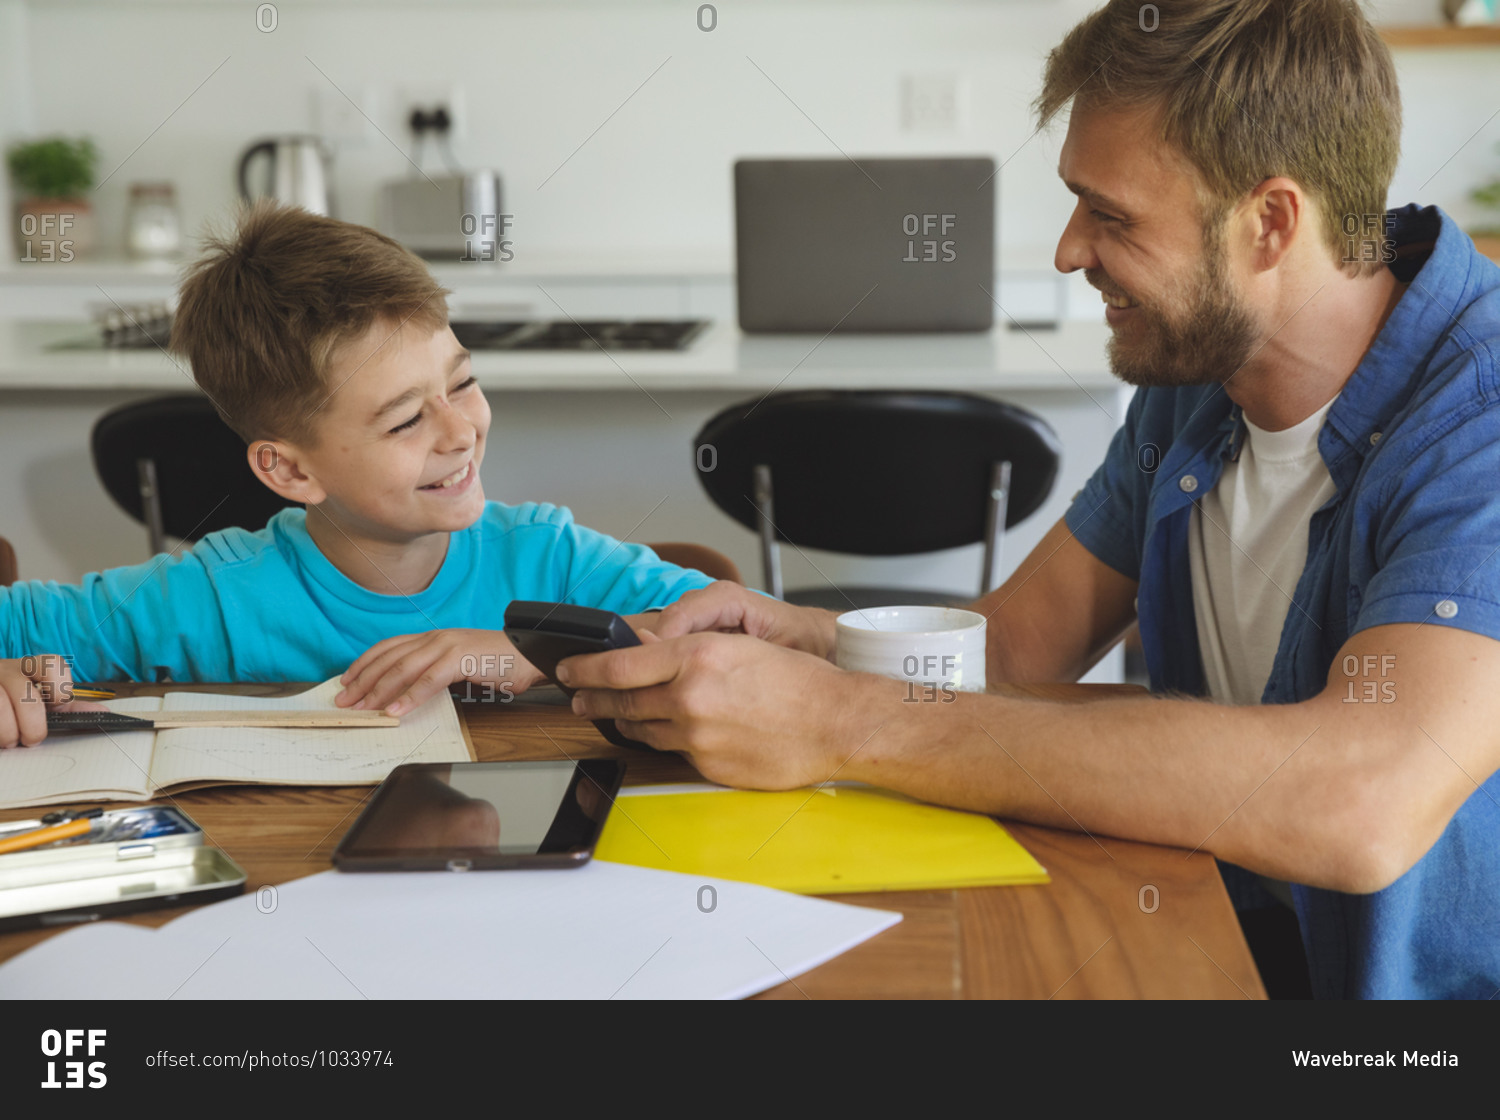 Caucasian man at home with his son together, in kitchen, father helping the boy doing homework at table. Social distancing during Covid 19 Coronavirus quarantine lockdown.